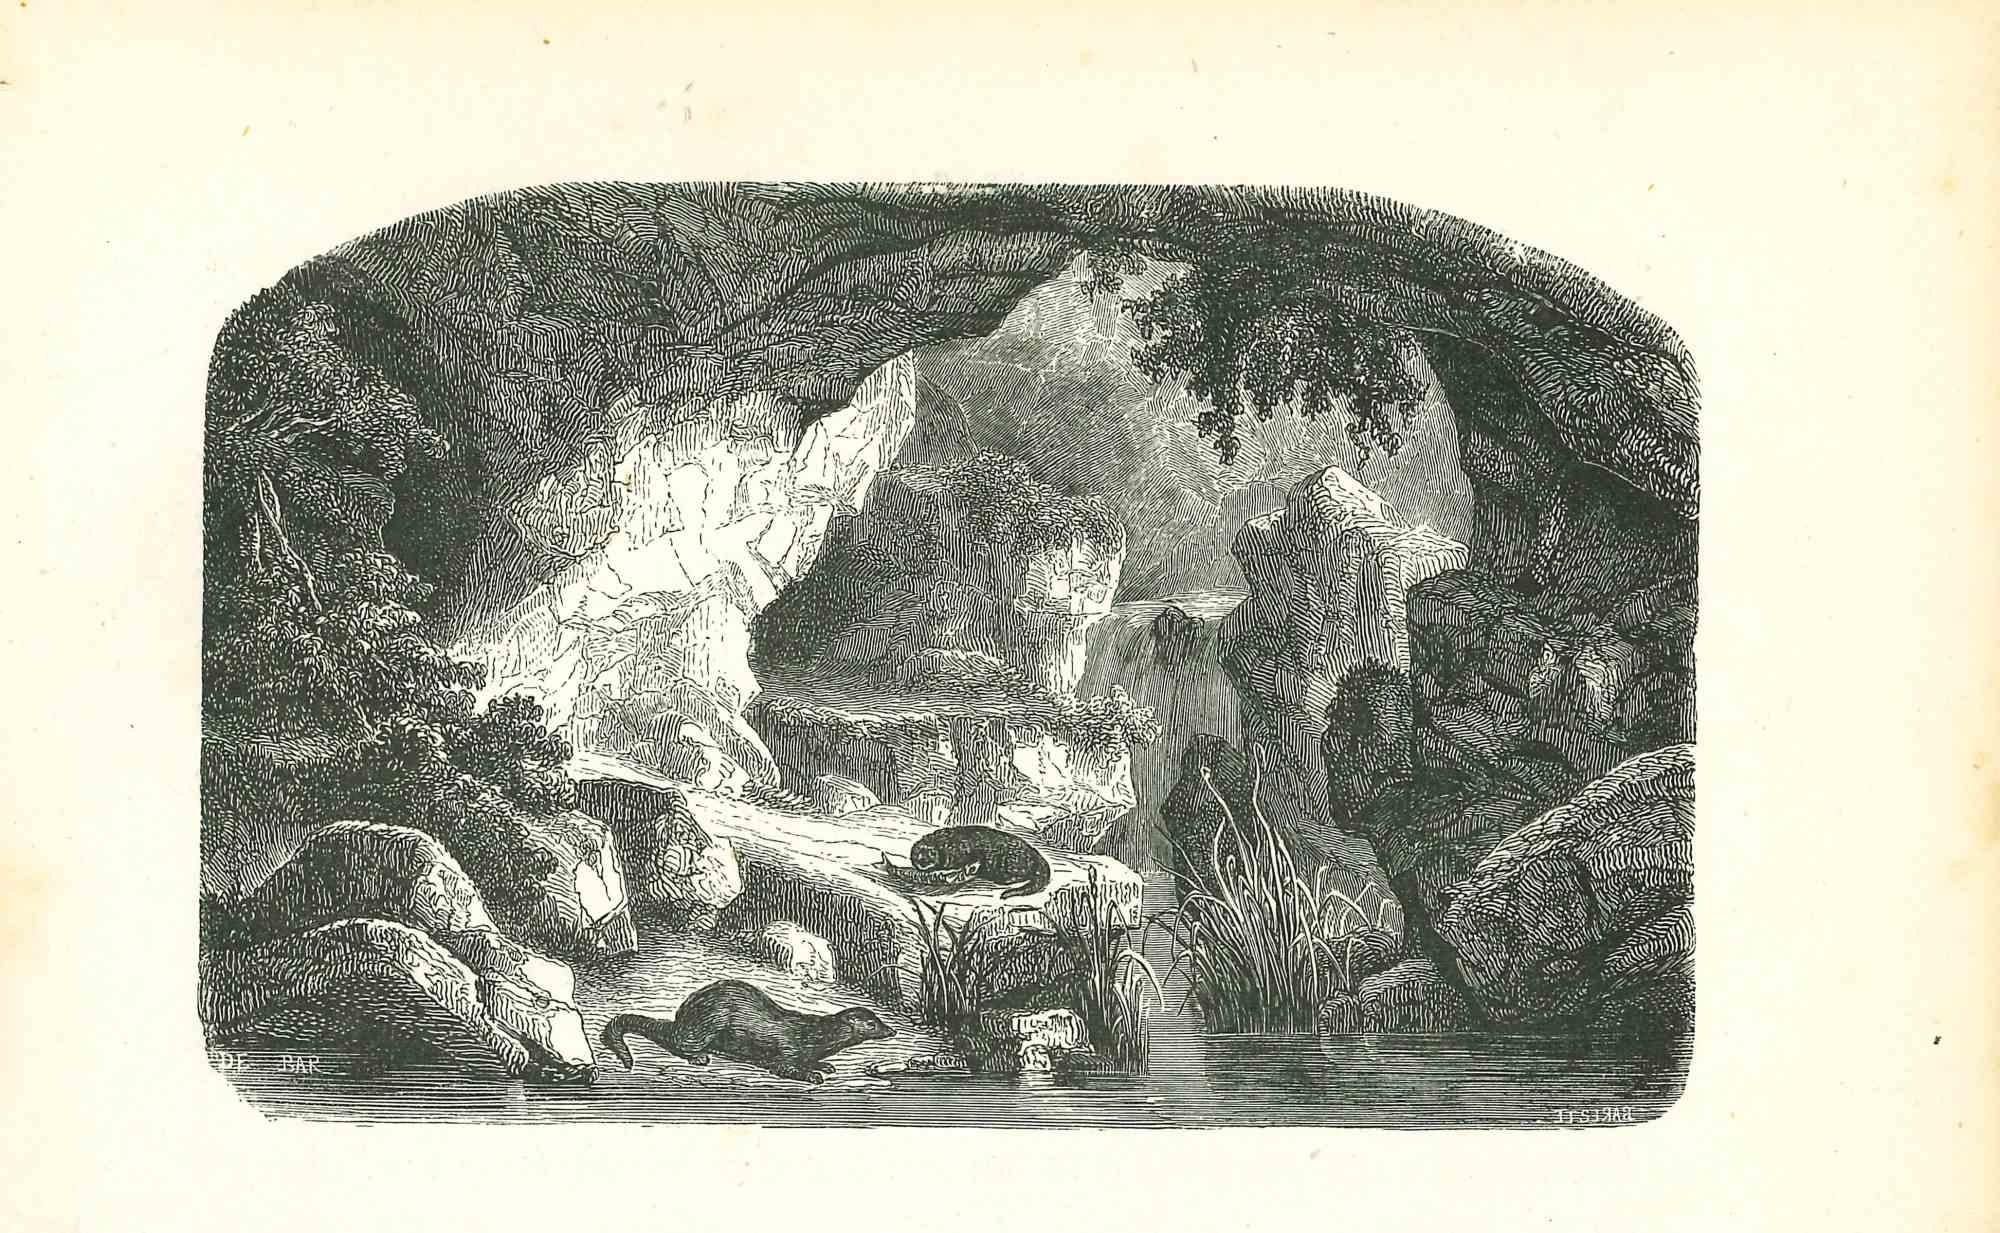 In The Forest Near Waterfall is an original lithograph on ivory-colored paper, realized by Paul Gervais (1816-1879). The artwork is from The Series of "Les Trois Règnes de la Nature", and was published in 1854.

Good conditions.

Titled on the